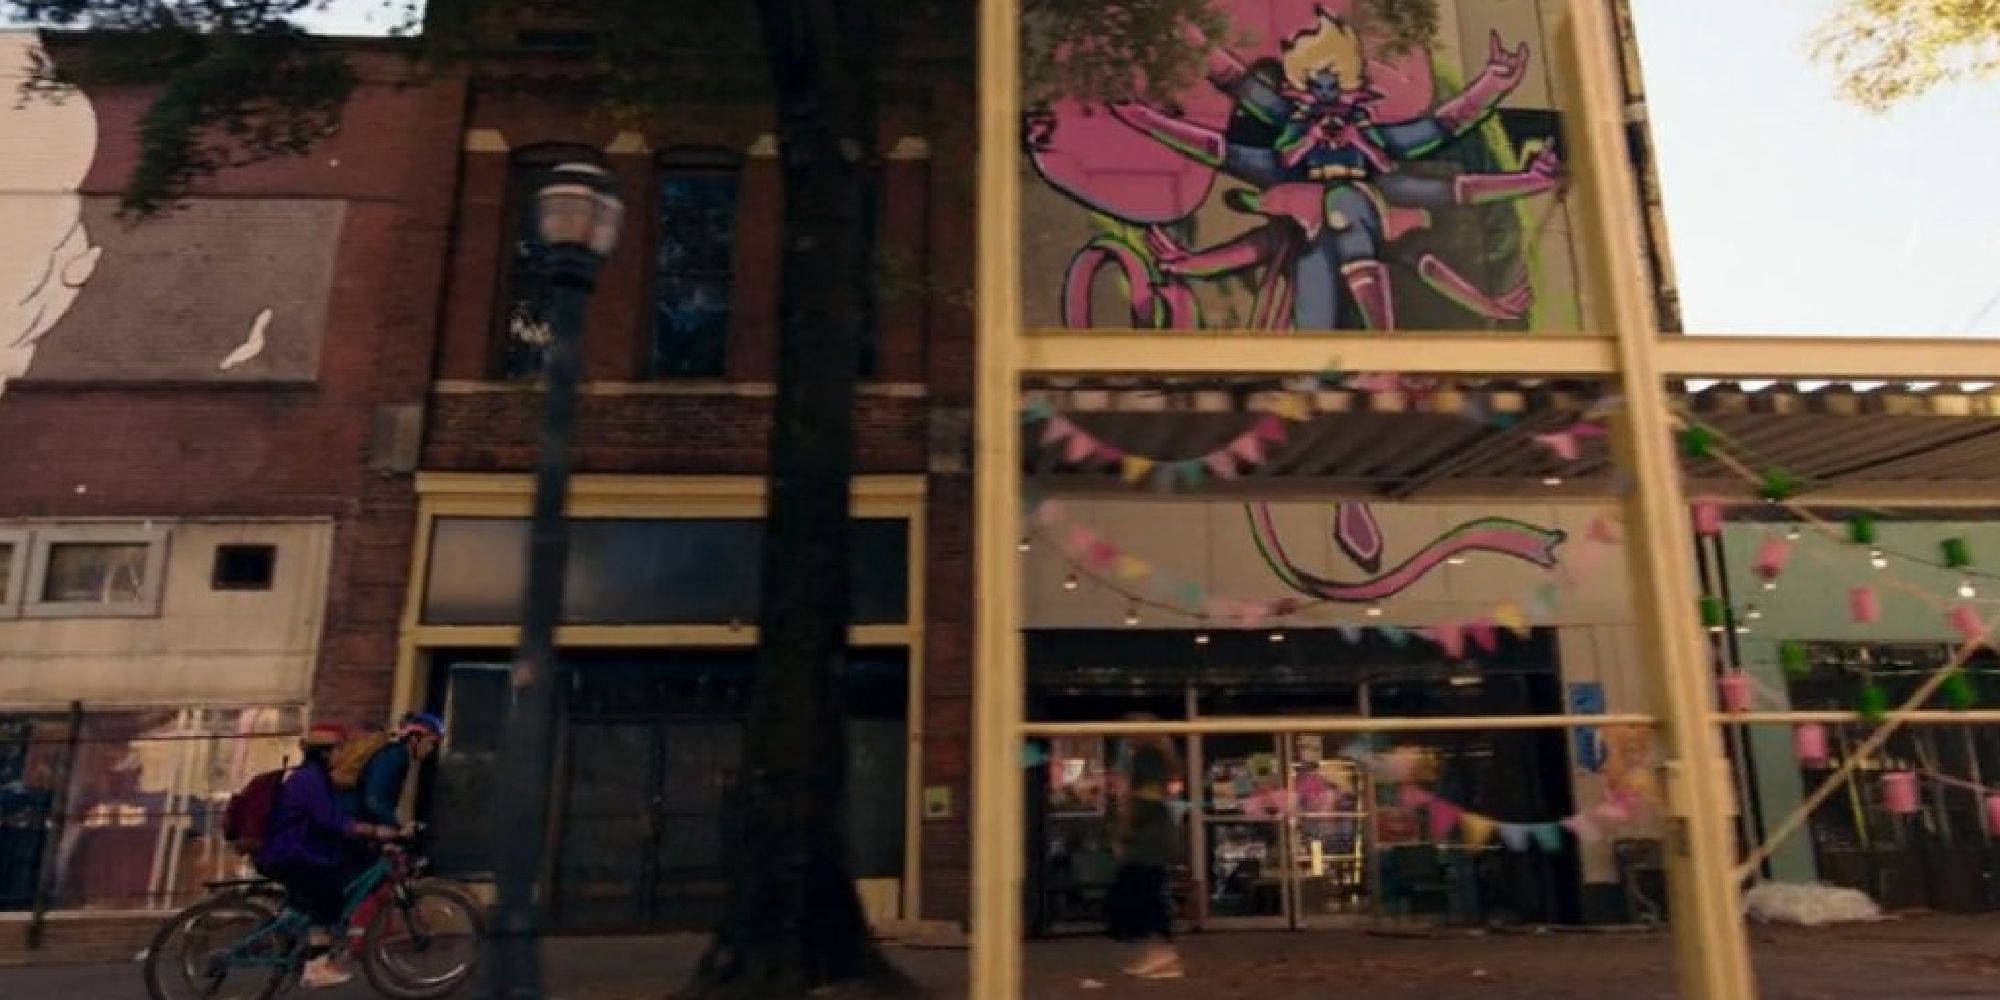 Bruno and Kamala biking beside a building with animated art depicting a Captain Marvel/Doctor Strange crossover